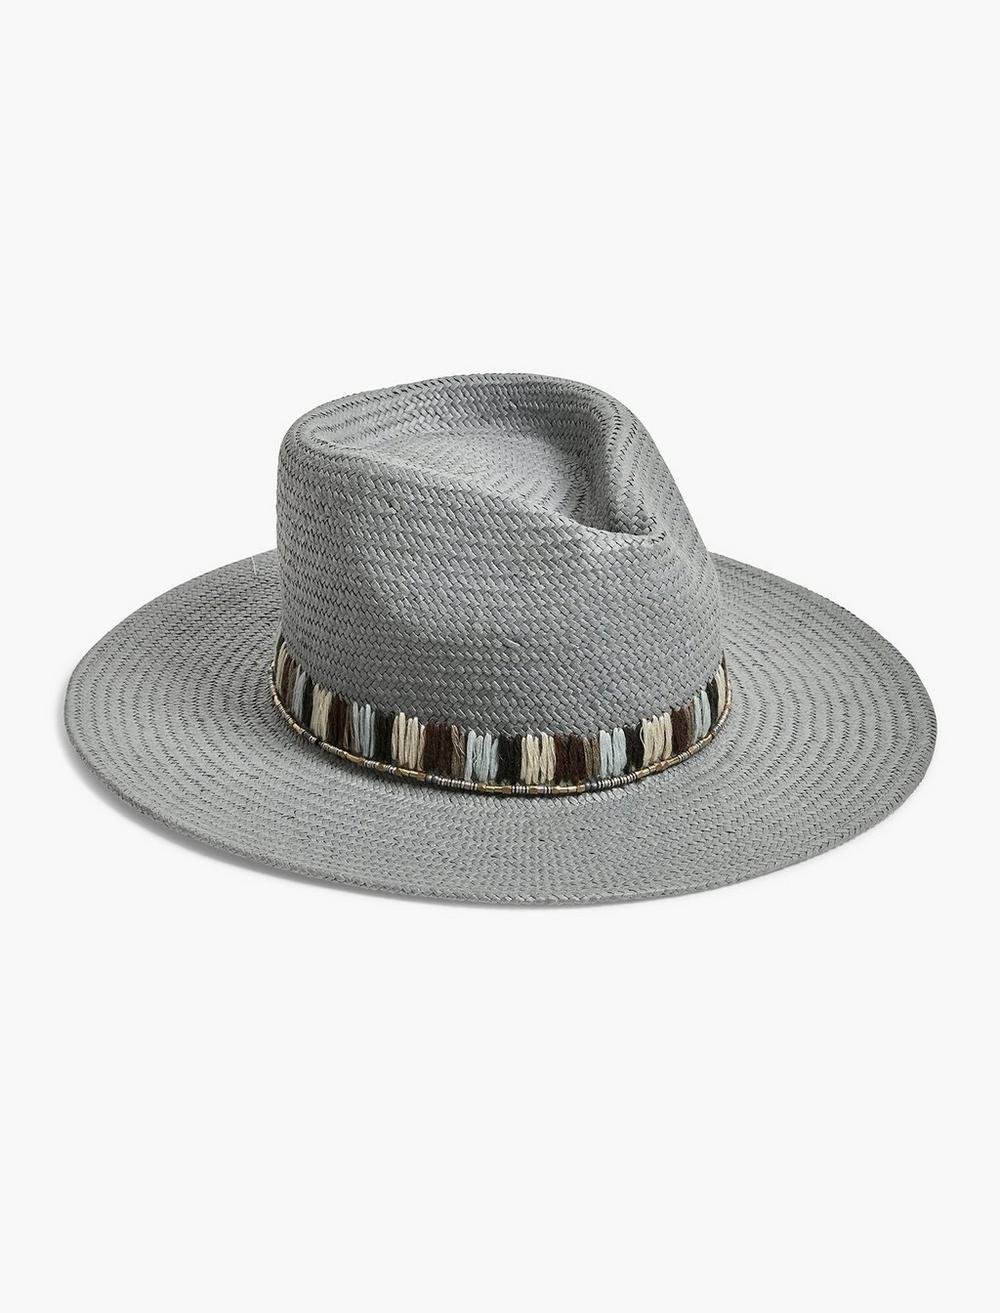 EMBROIDERED STRAW HAT, image 1